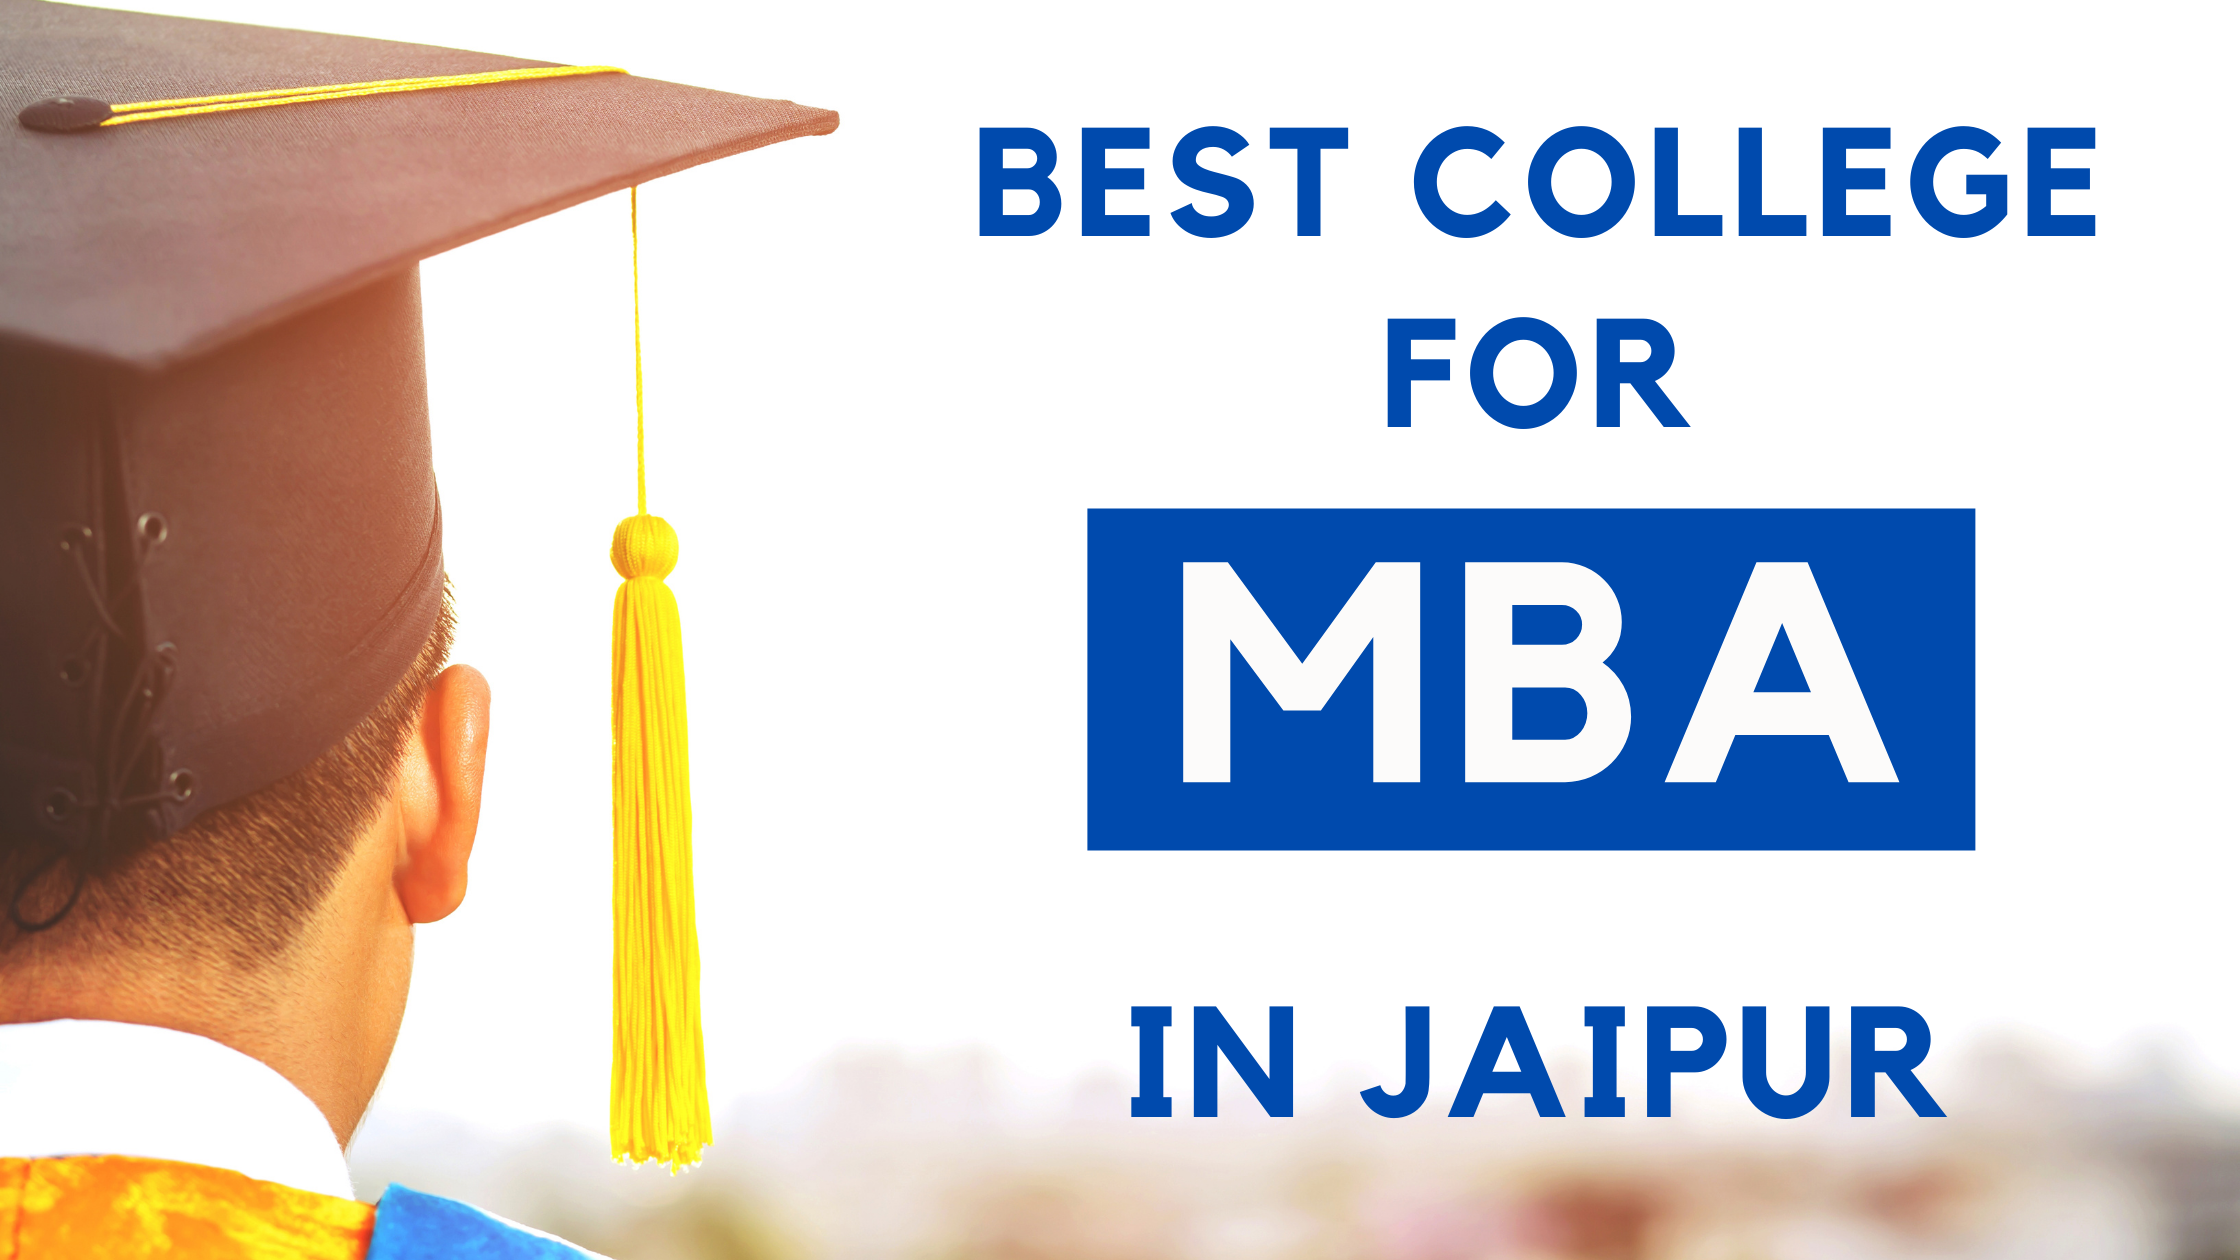 Best College for MBA in Jaipur